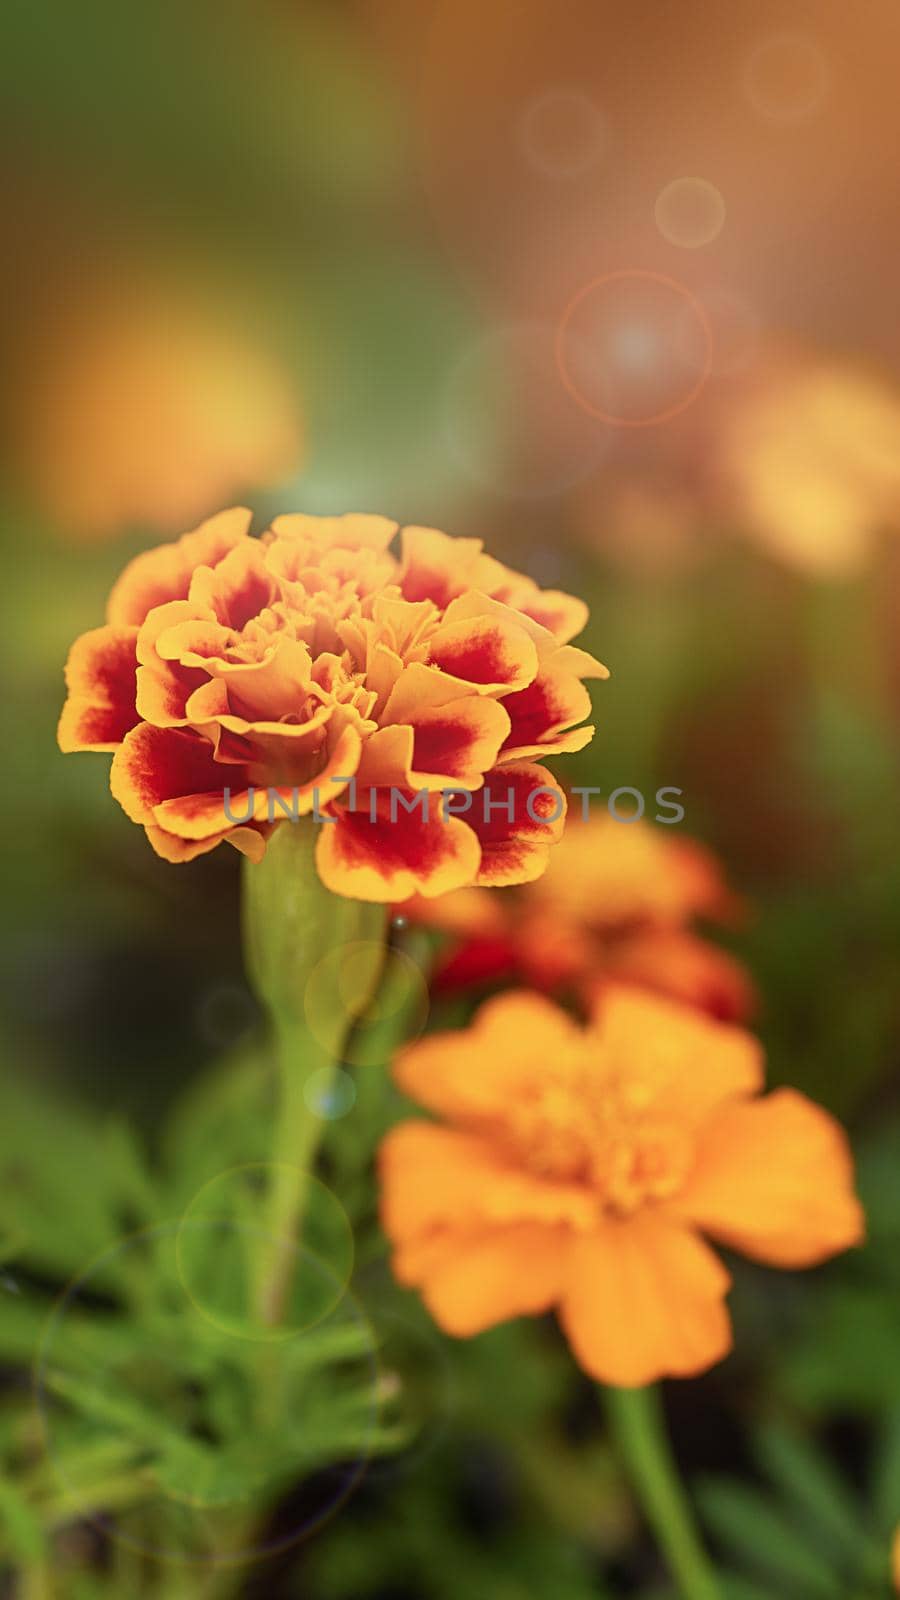 Marigold, yellow marigold flower, orange marigold, marigold petals. Close-up of a flower on a dark background. Vertical photo for intro or background. Romantic sunbeams and glare